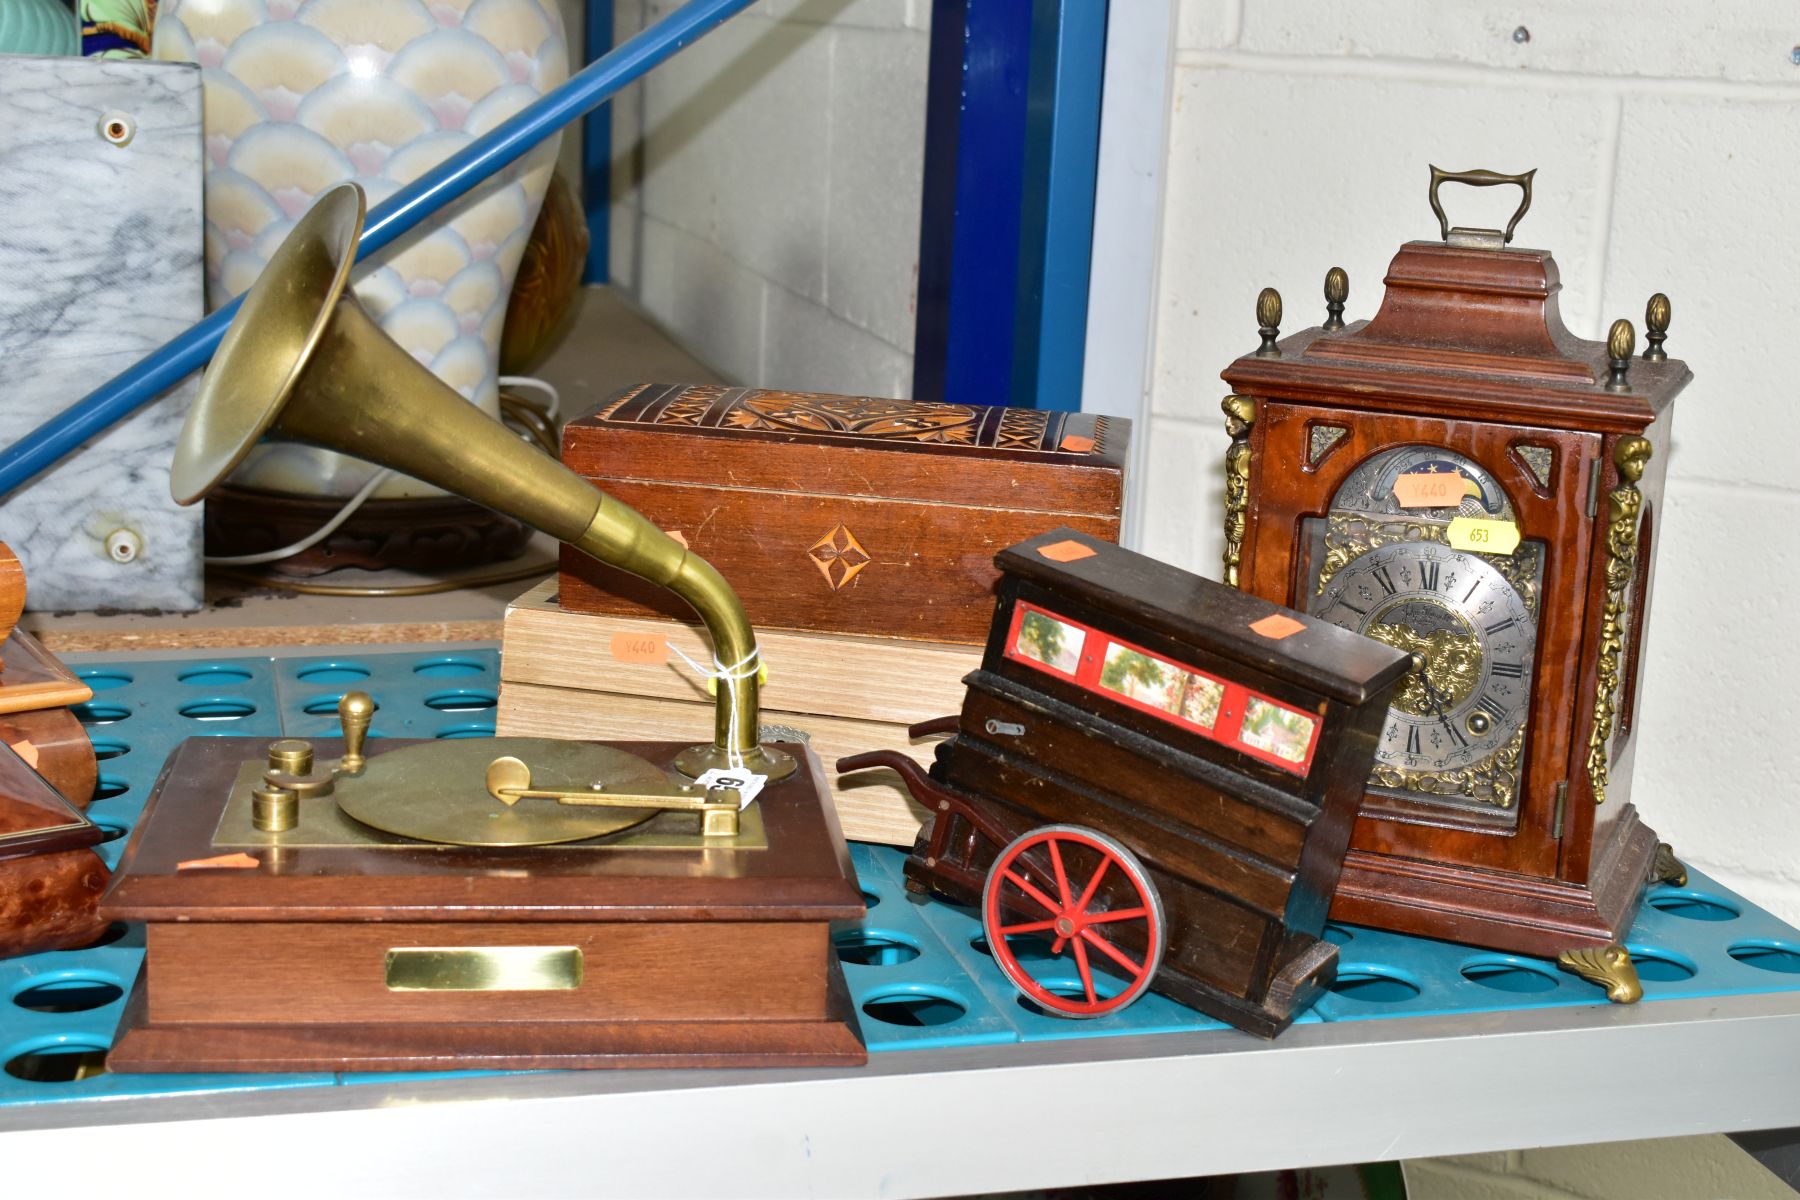 A GROUP OF EIGHT MUSIC BOXES AND TWO MANTEL CLOCKS, to include a Tallent music box in the form of